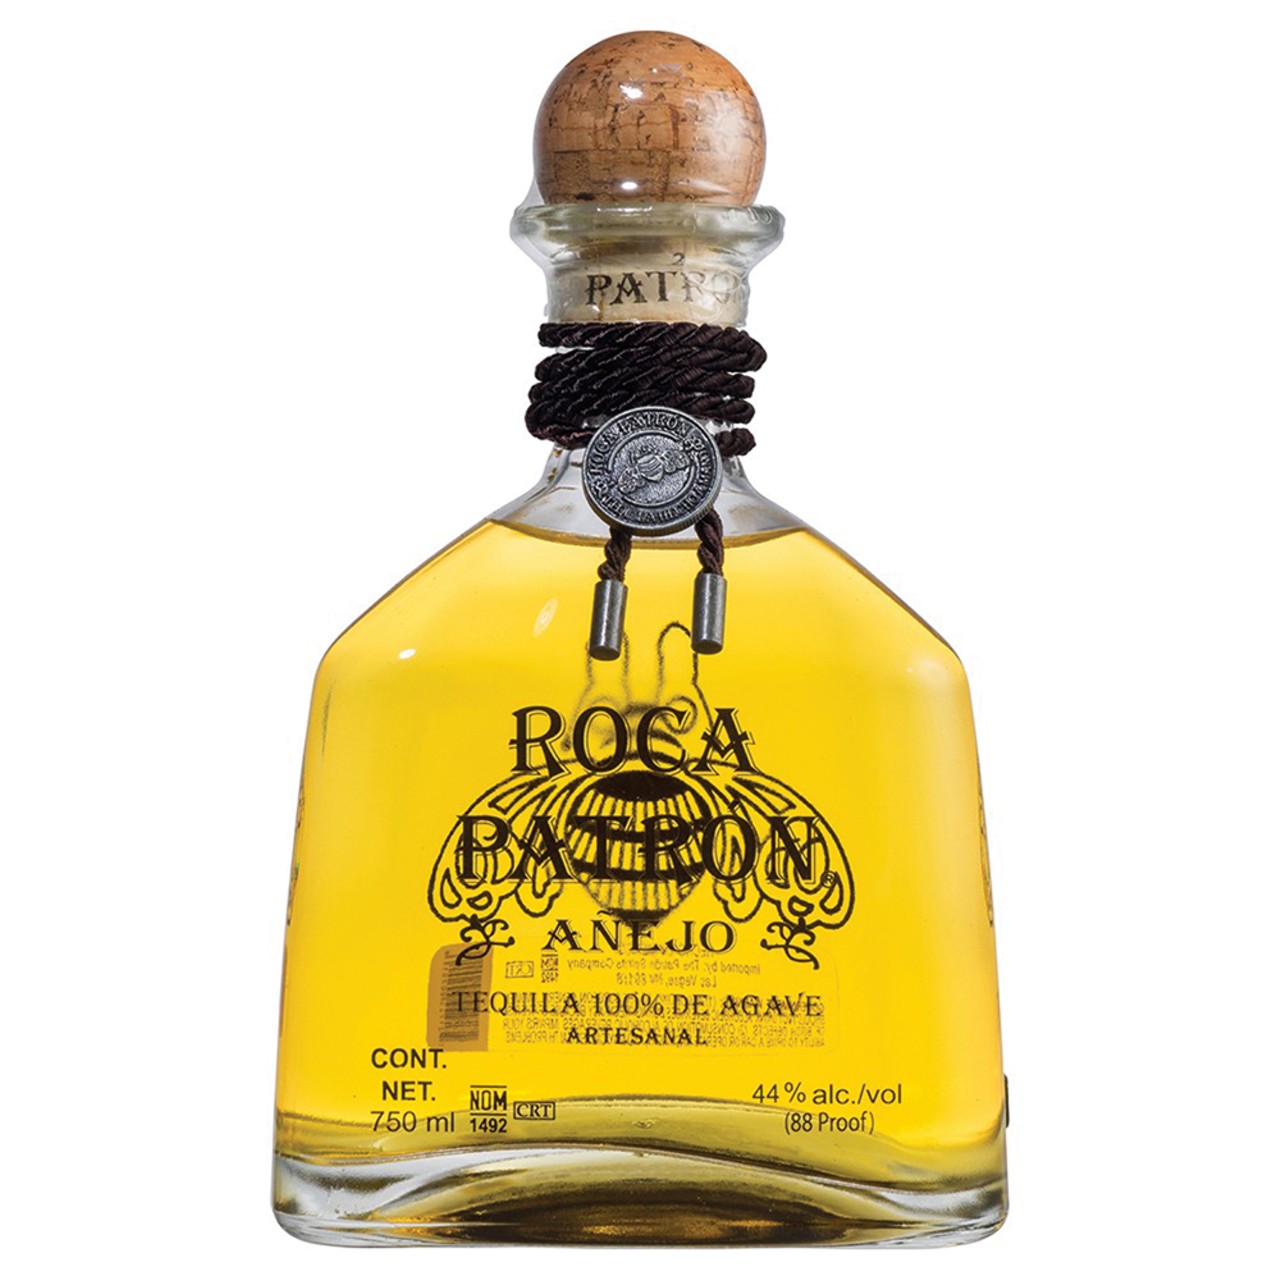 When you think of tequila, you probably think of Patron. 